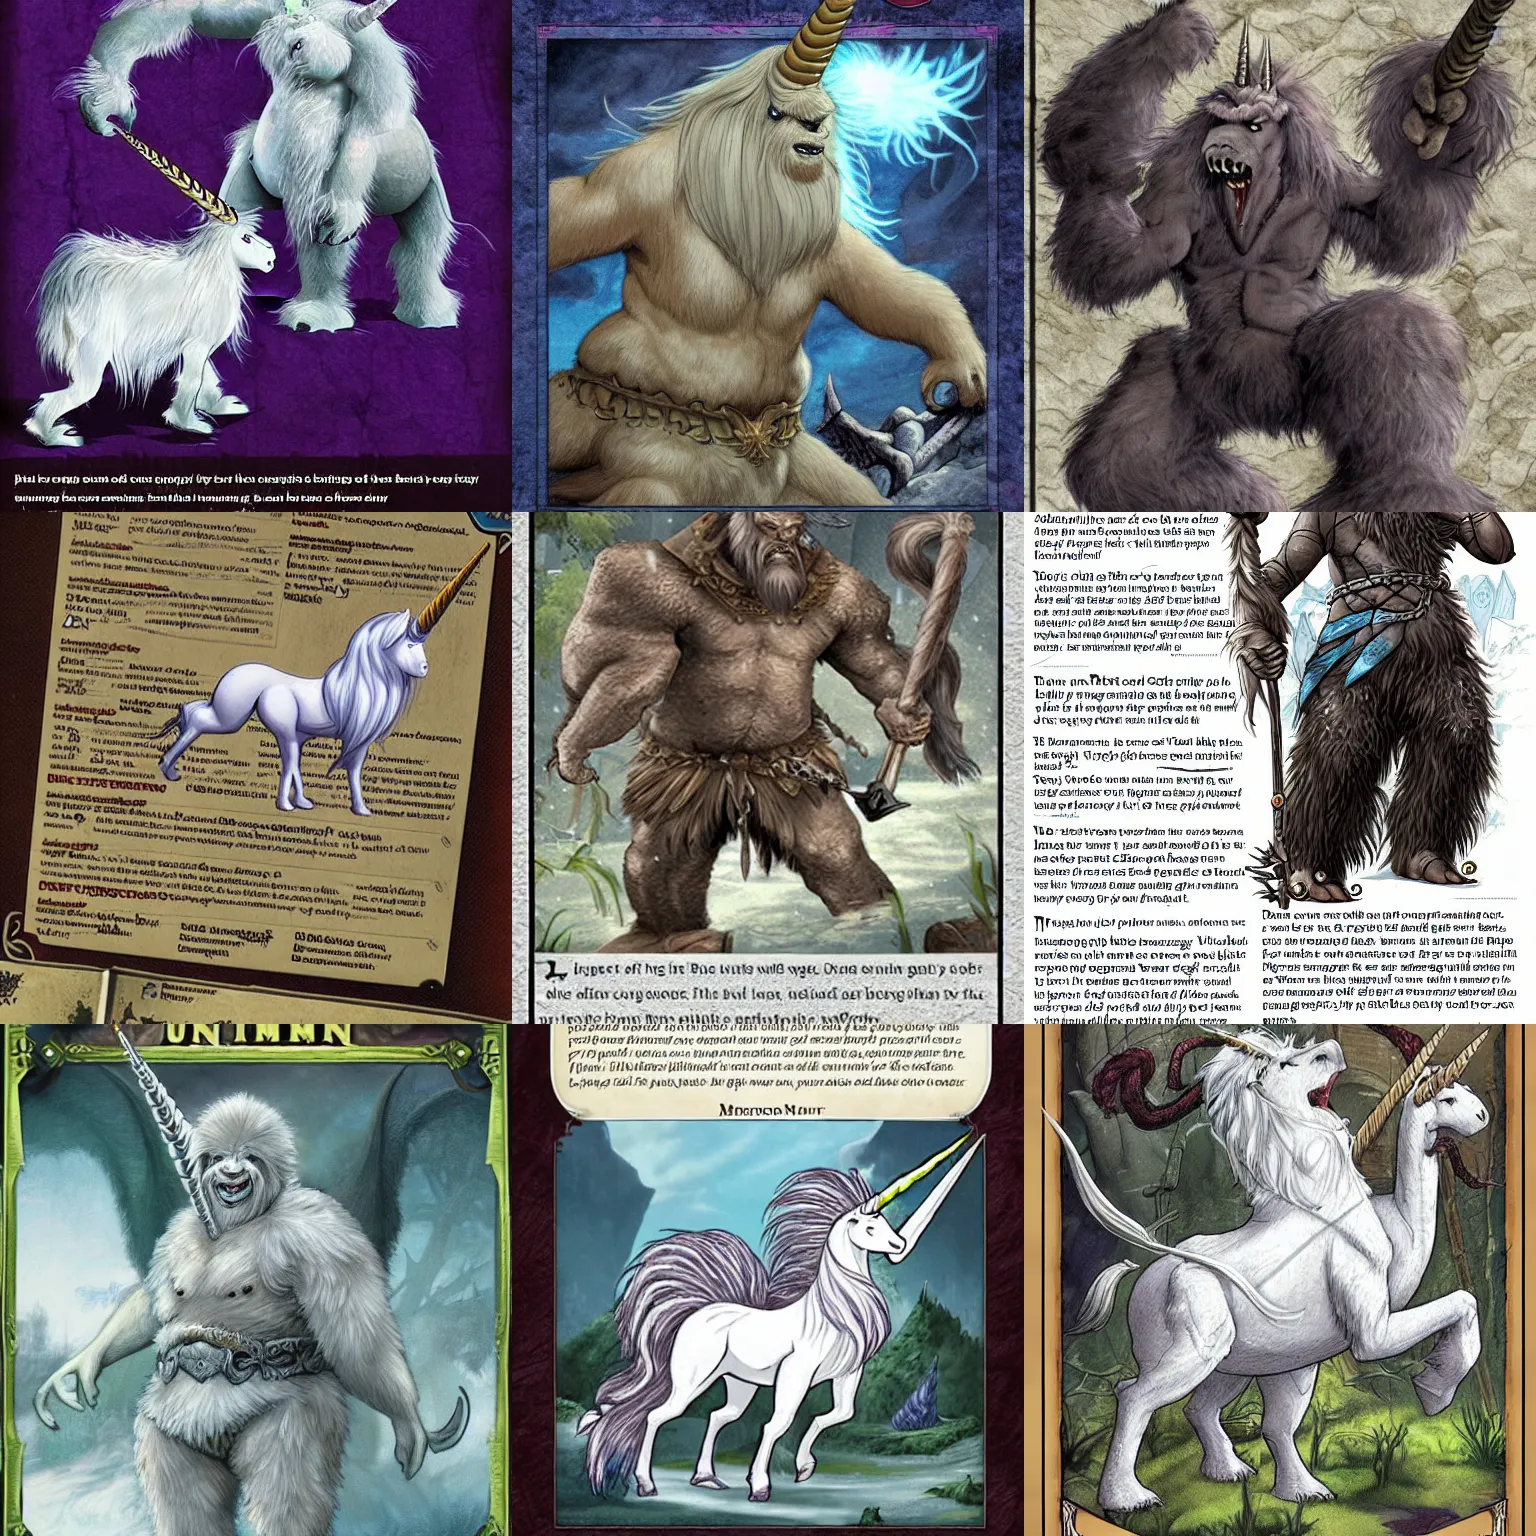 Prompt: unicorn with a yeti - like appearance in the dungeons and dragons 2 e monster manual